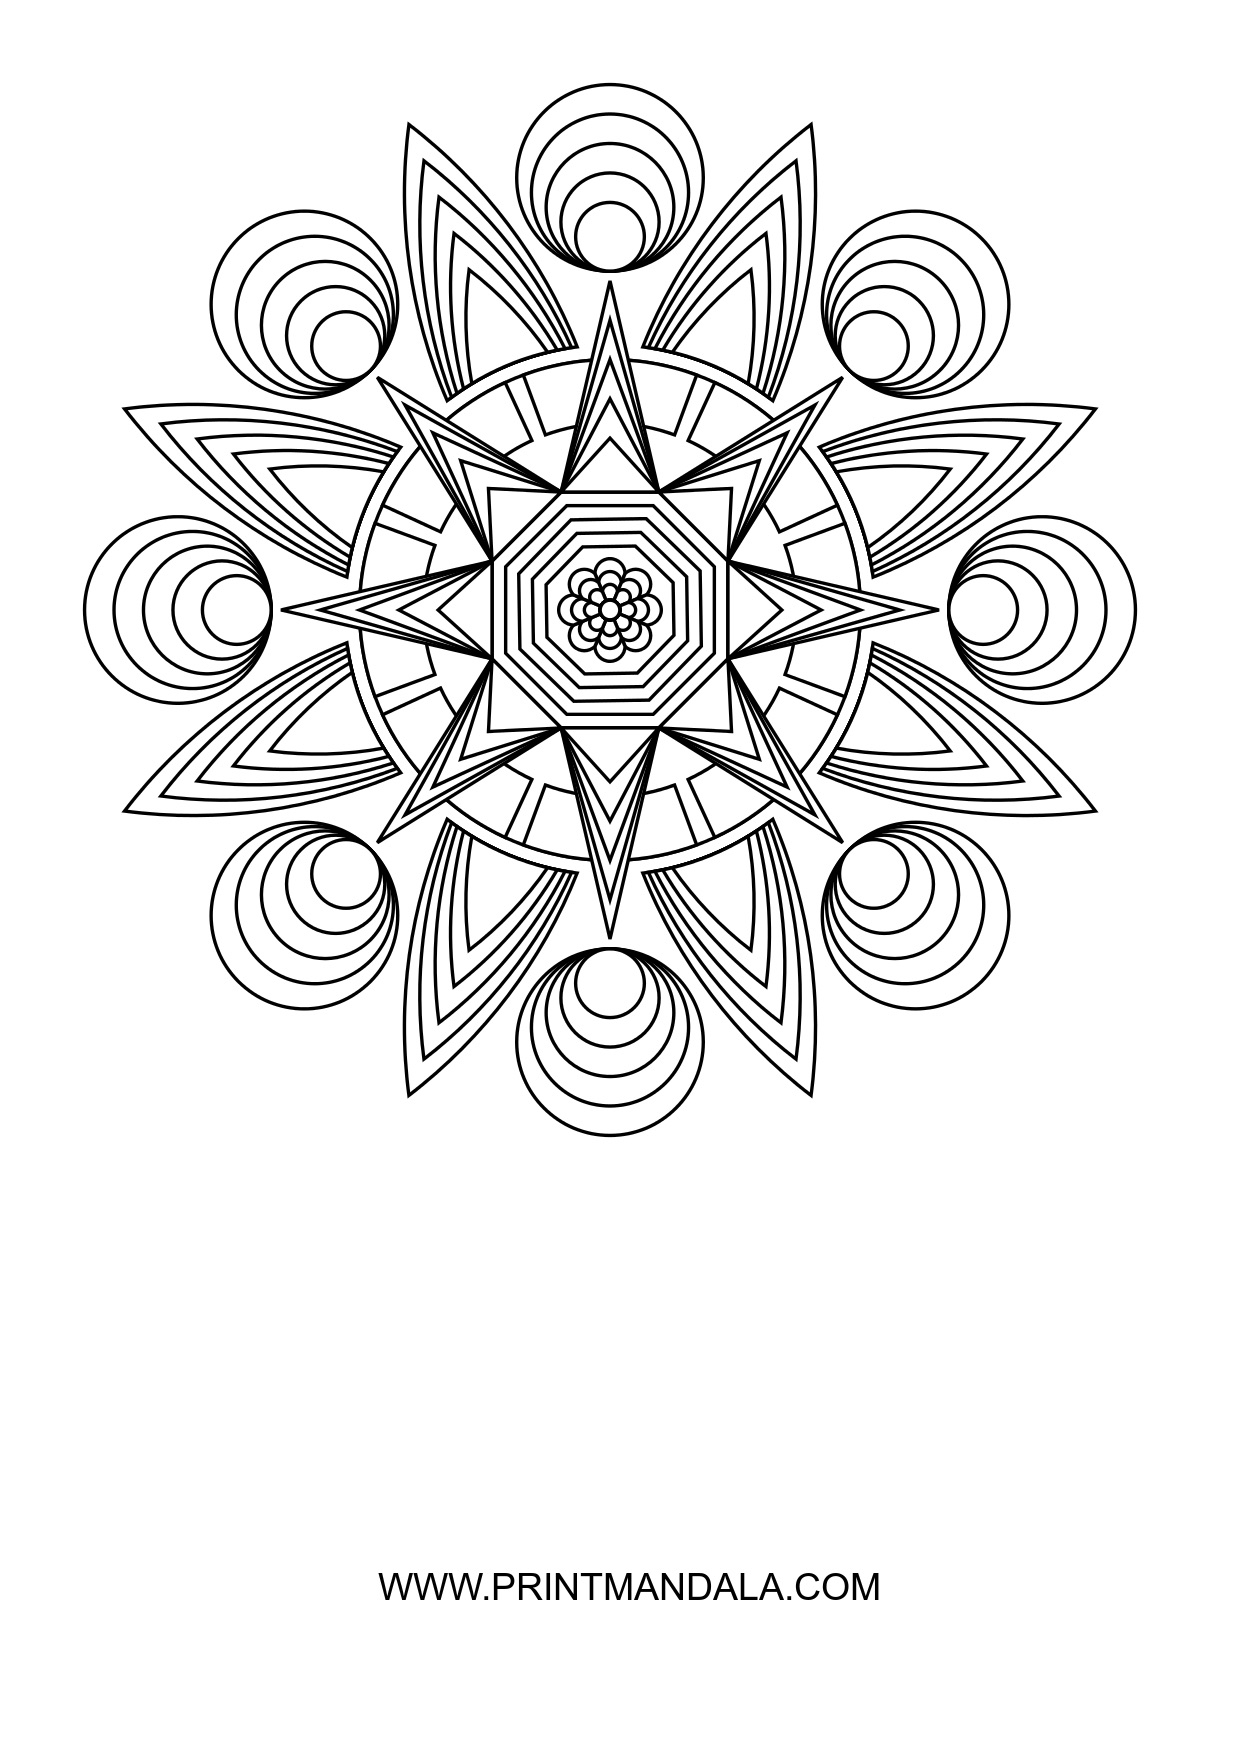 Mental Health Coloring Pages, Anxiety Coloring Pages, Anti-stress